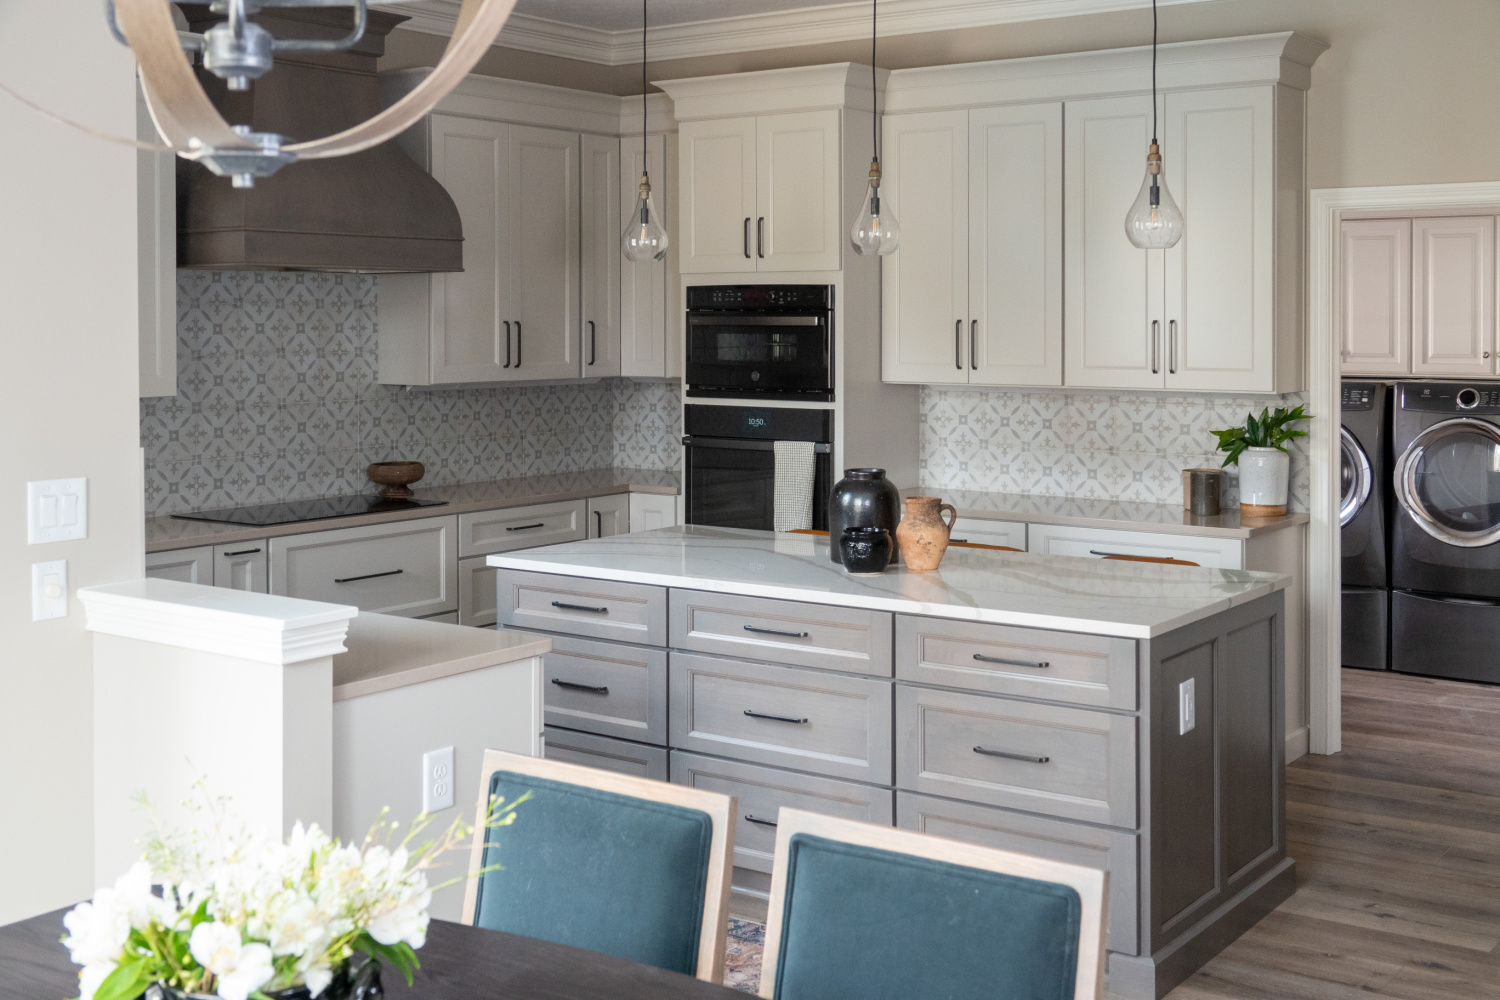 Nicholas Design Build | A remodeled kitchen with white cabinets and gray appliances.